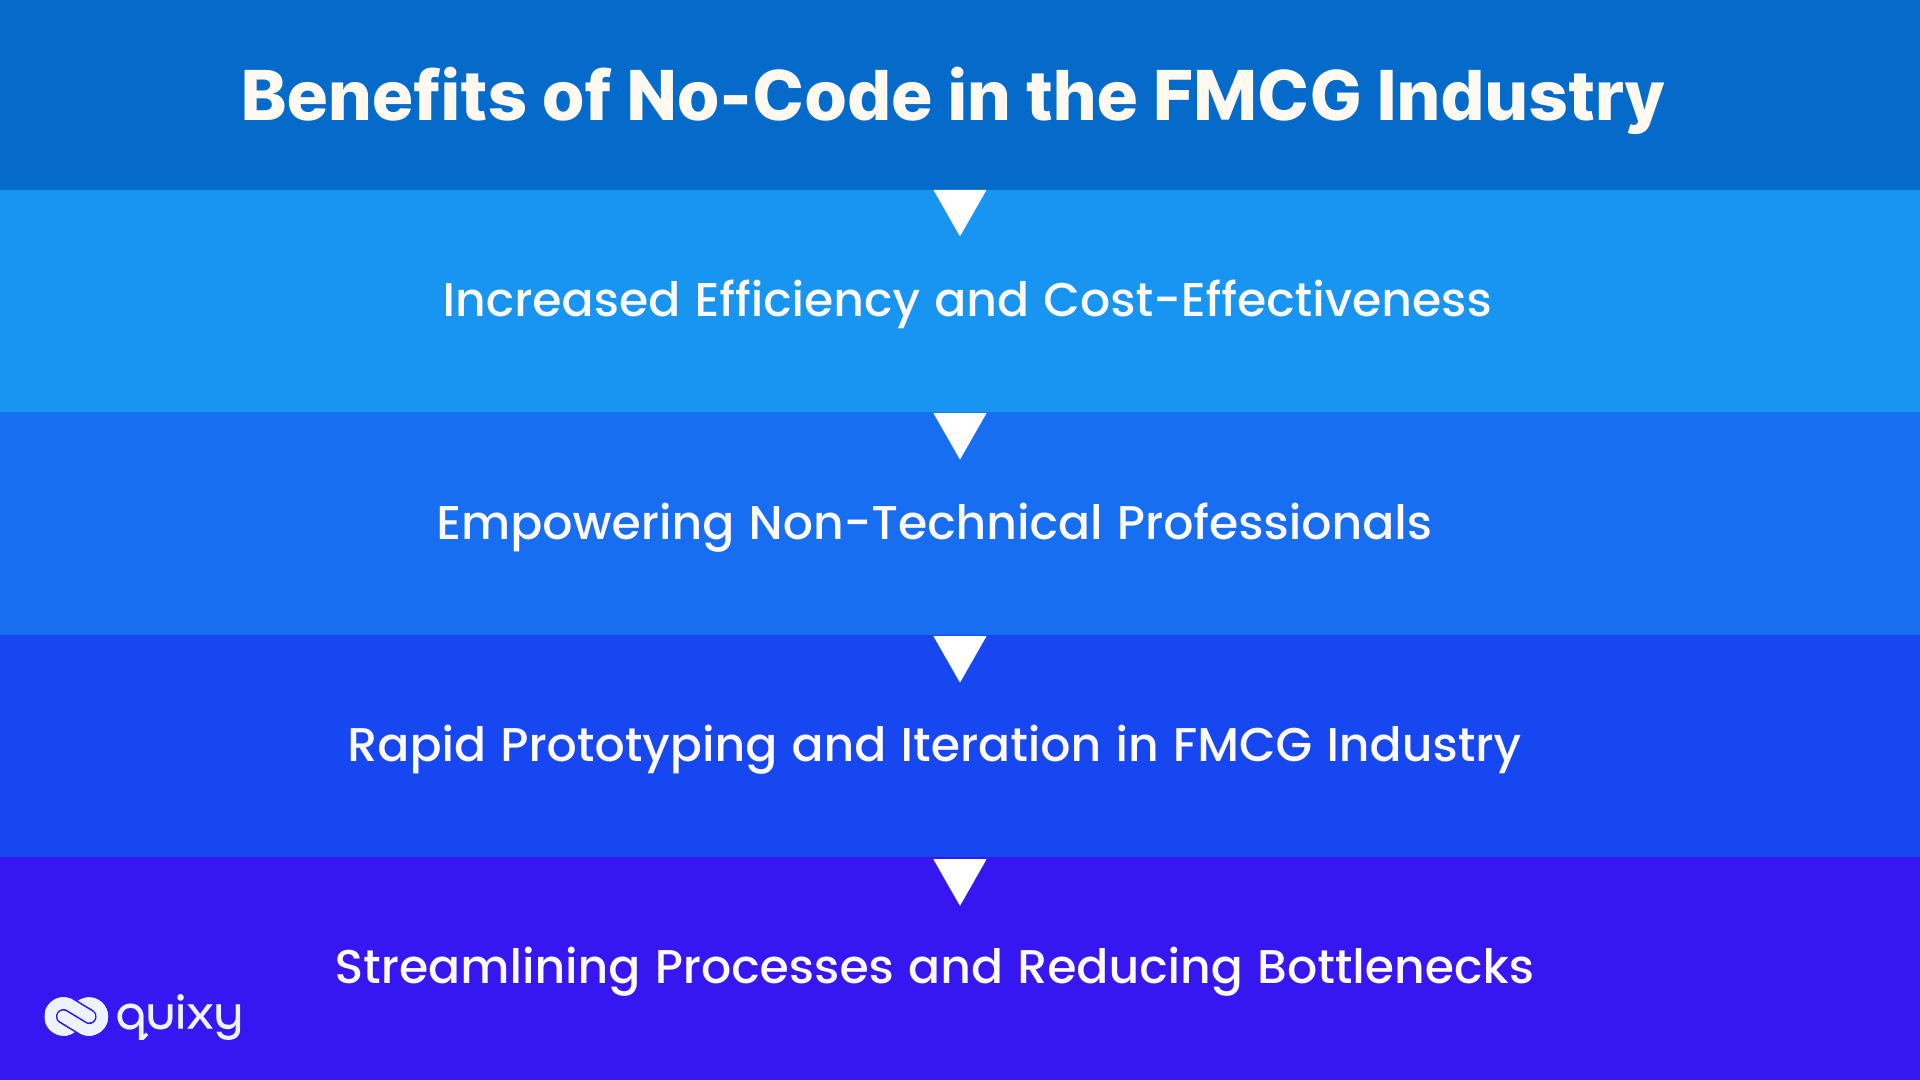 Benefits of No-Code in the FMCG Industry